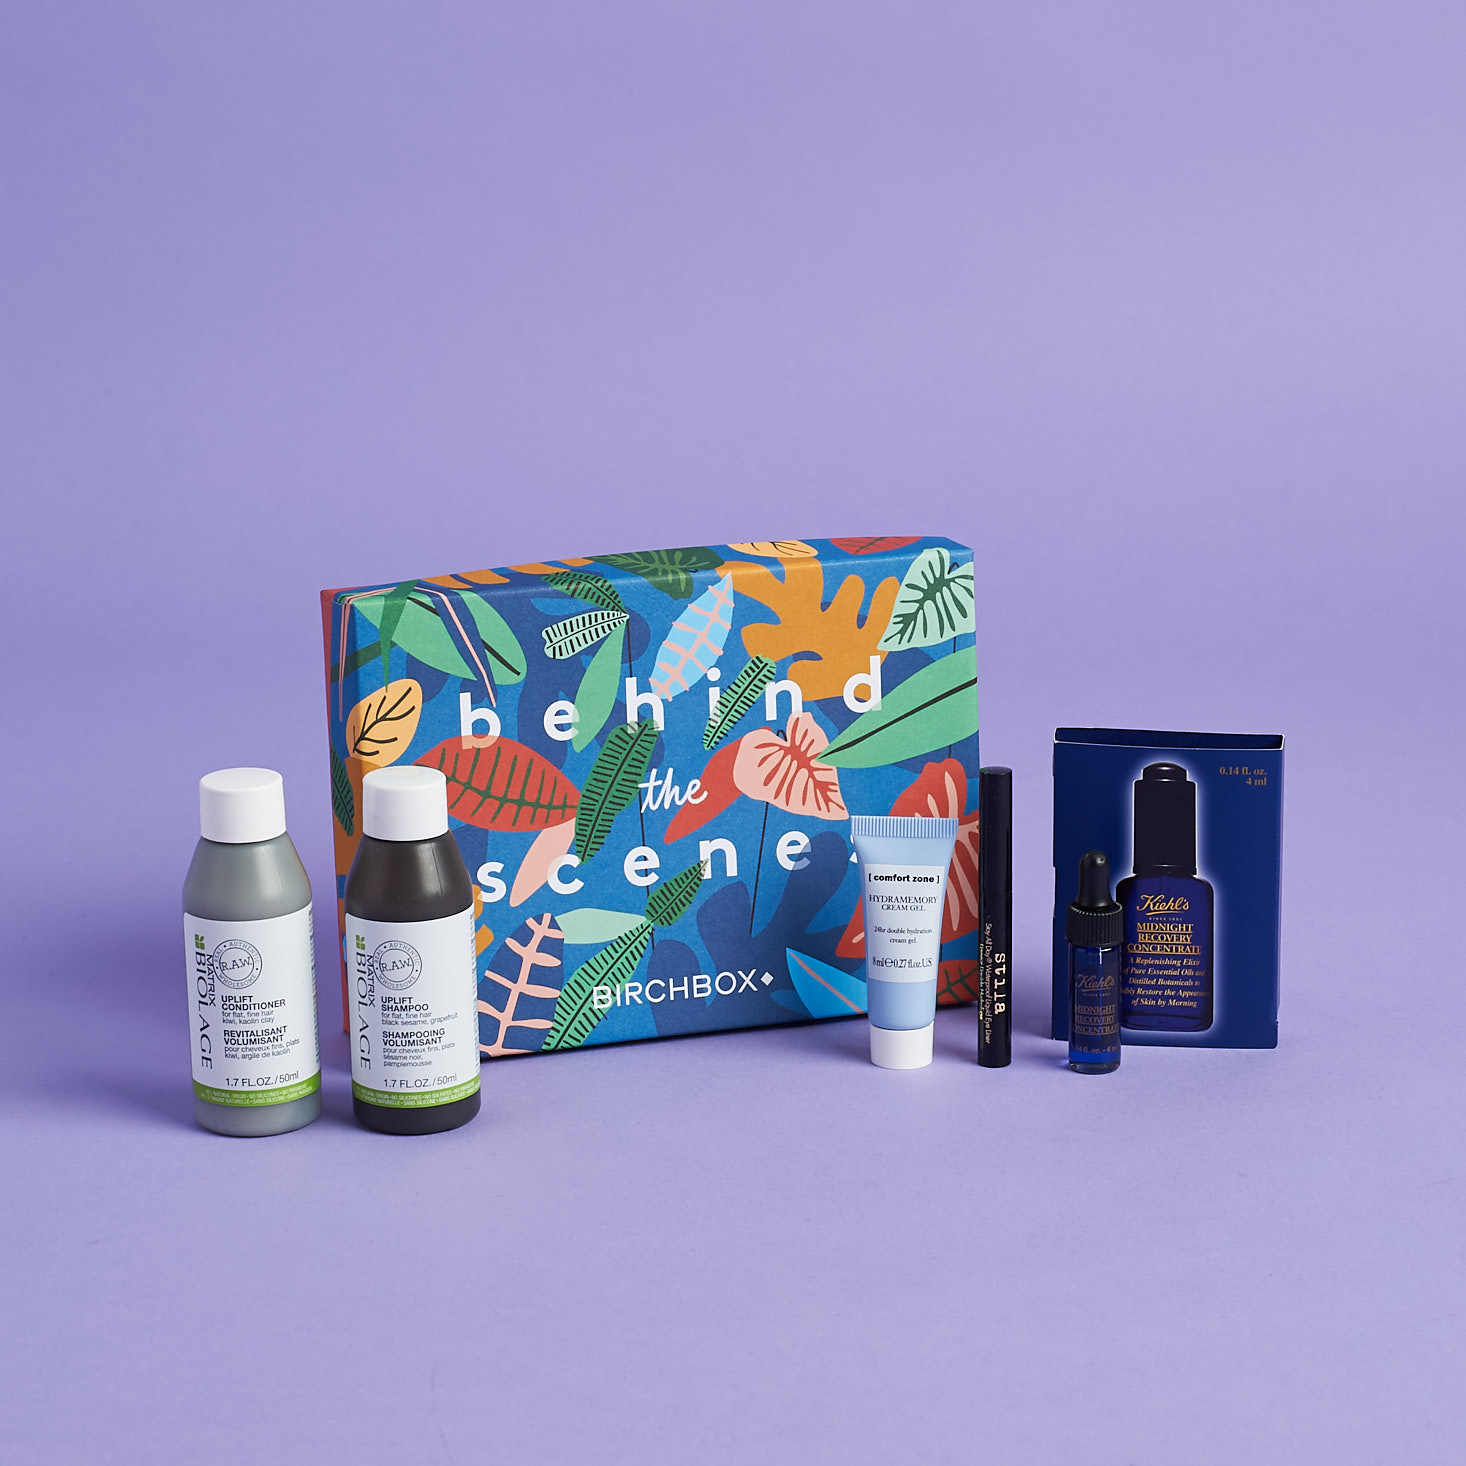 Can You Customize Your Birchbox?